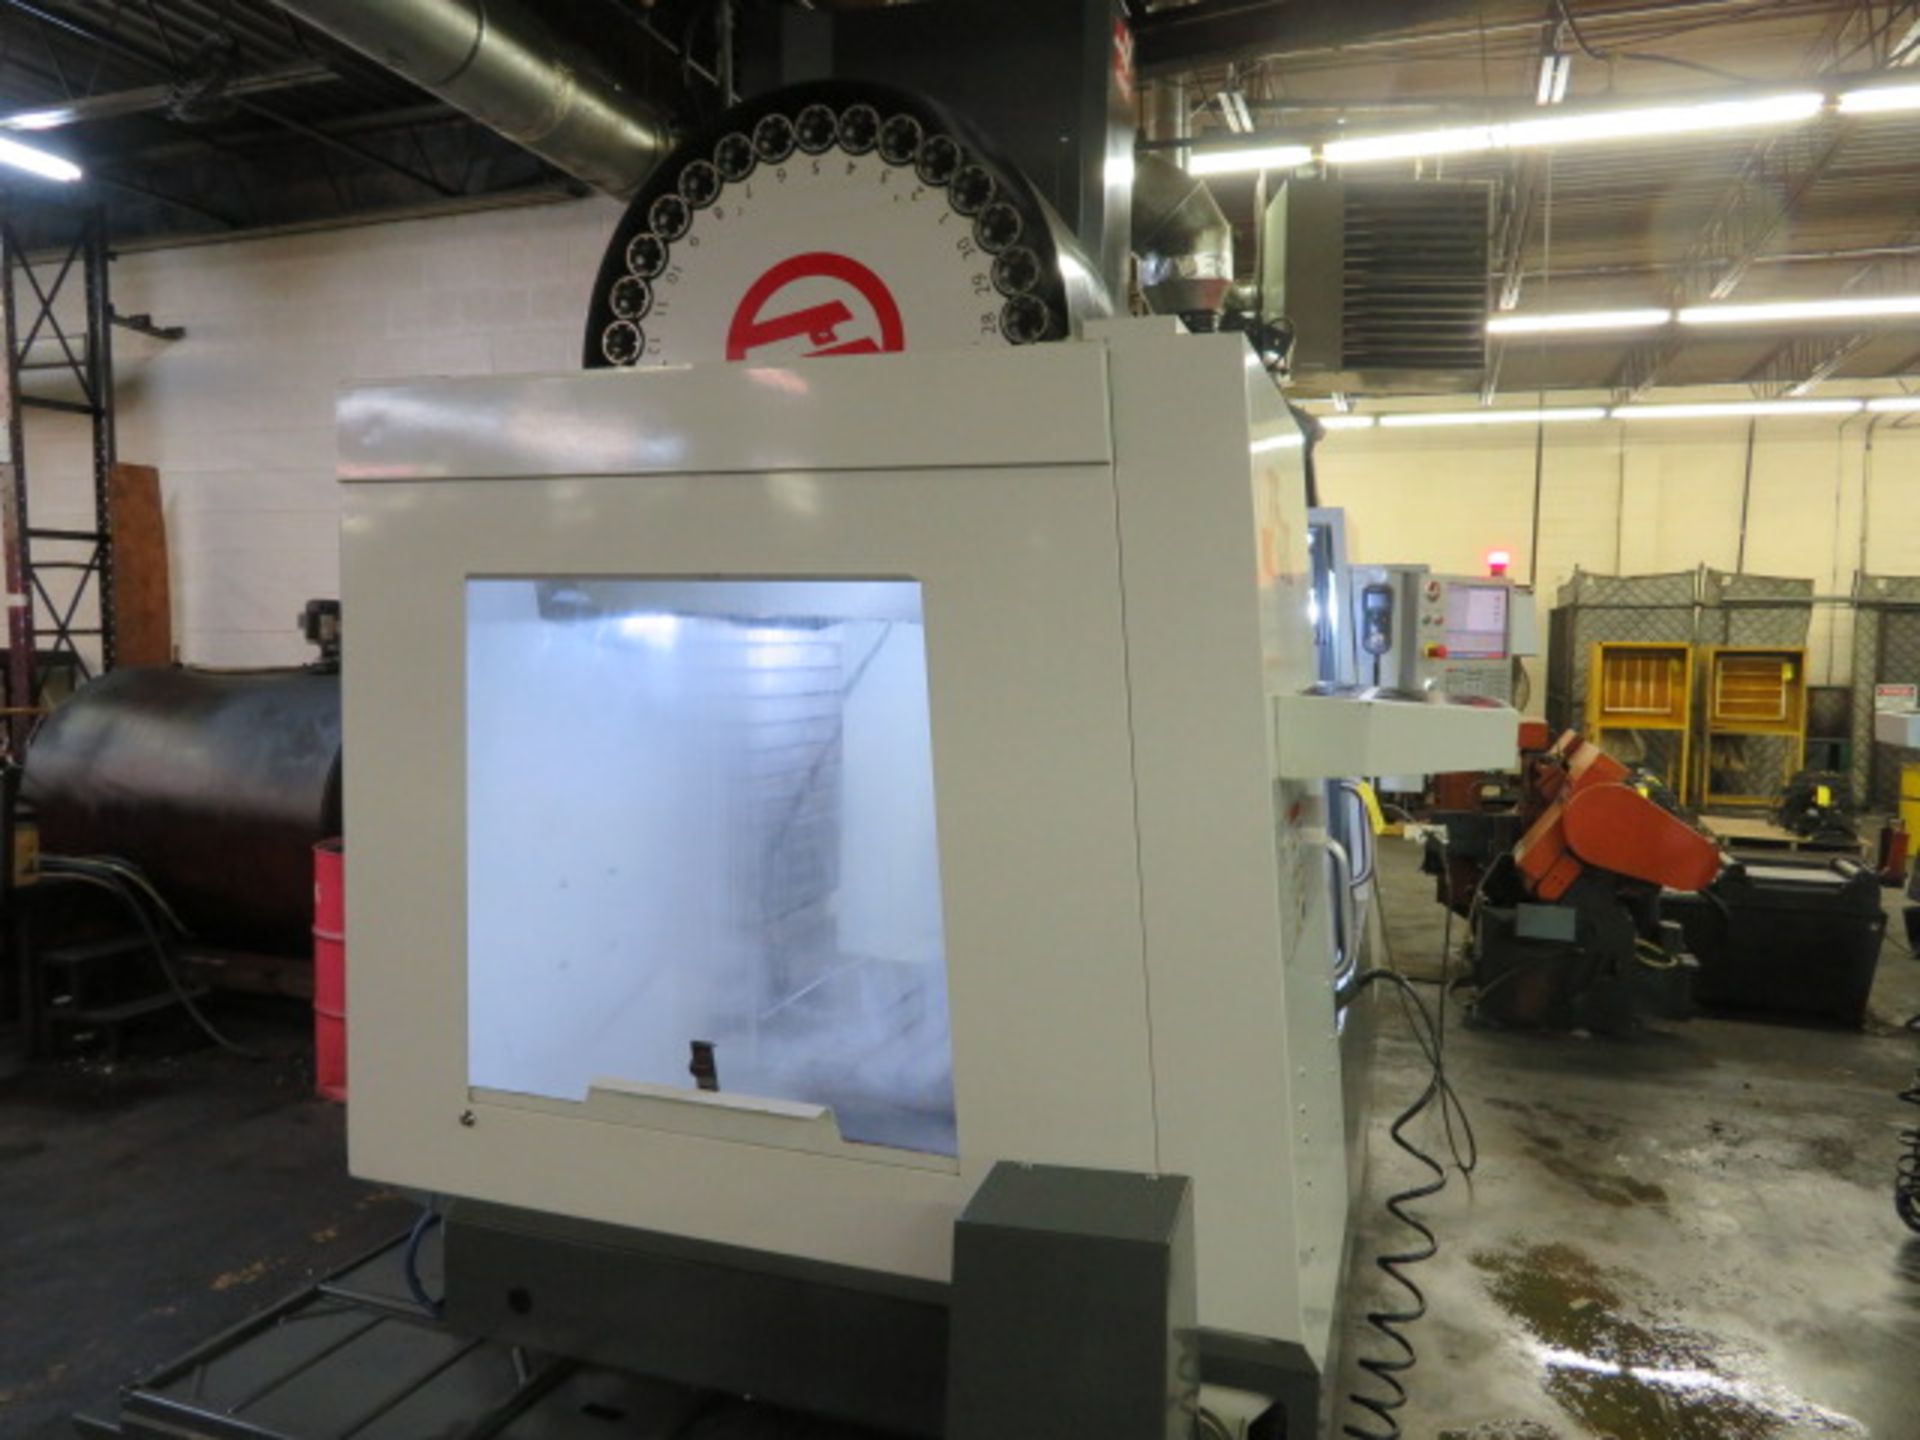 2018 HAAS VF5-50XT CNC Vertical Machining Center, S/N 1151875, HAAS Control, 4TH AXIS ENABLED - Image 5 of 11